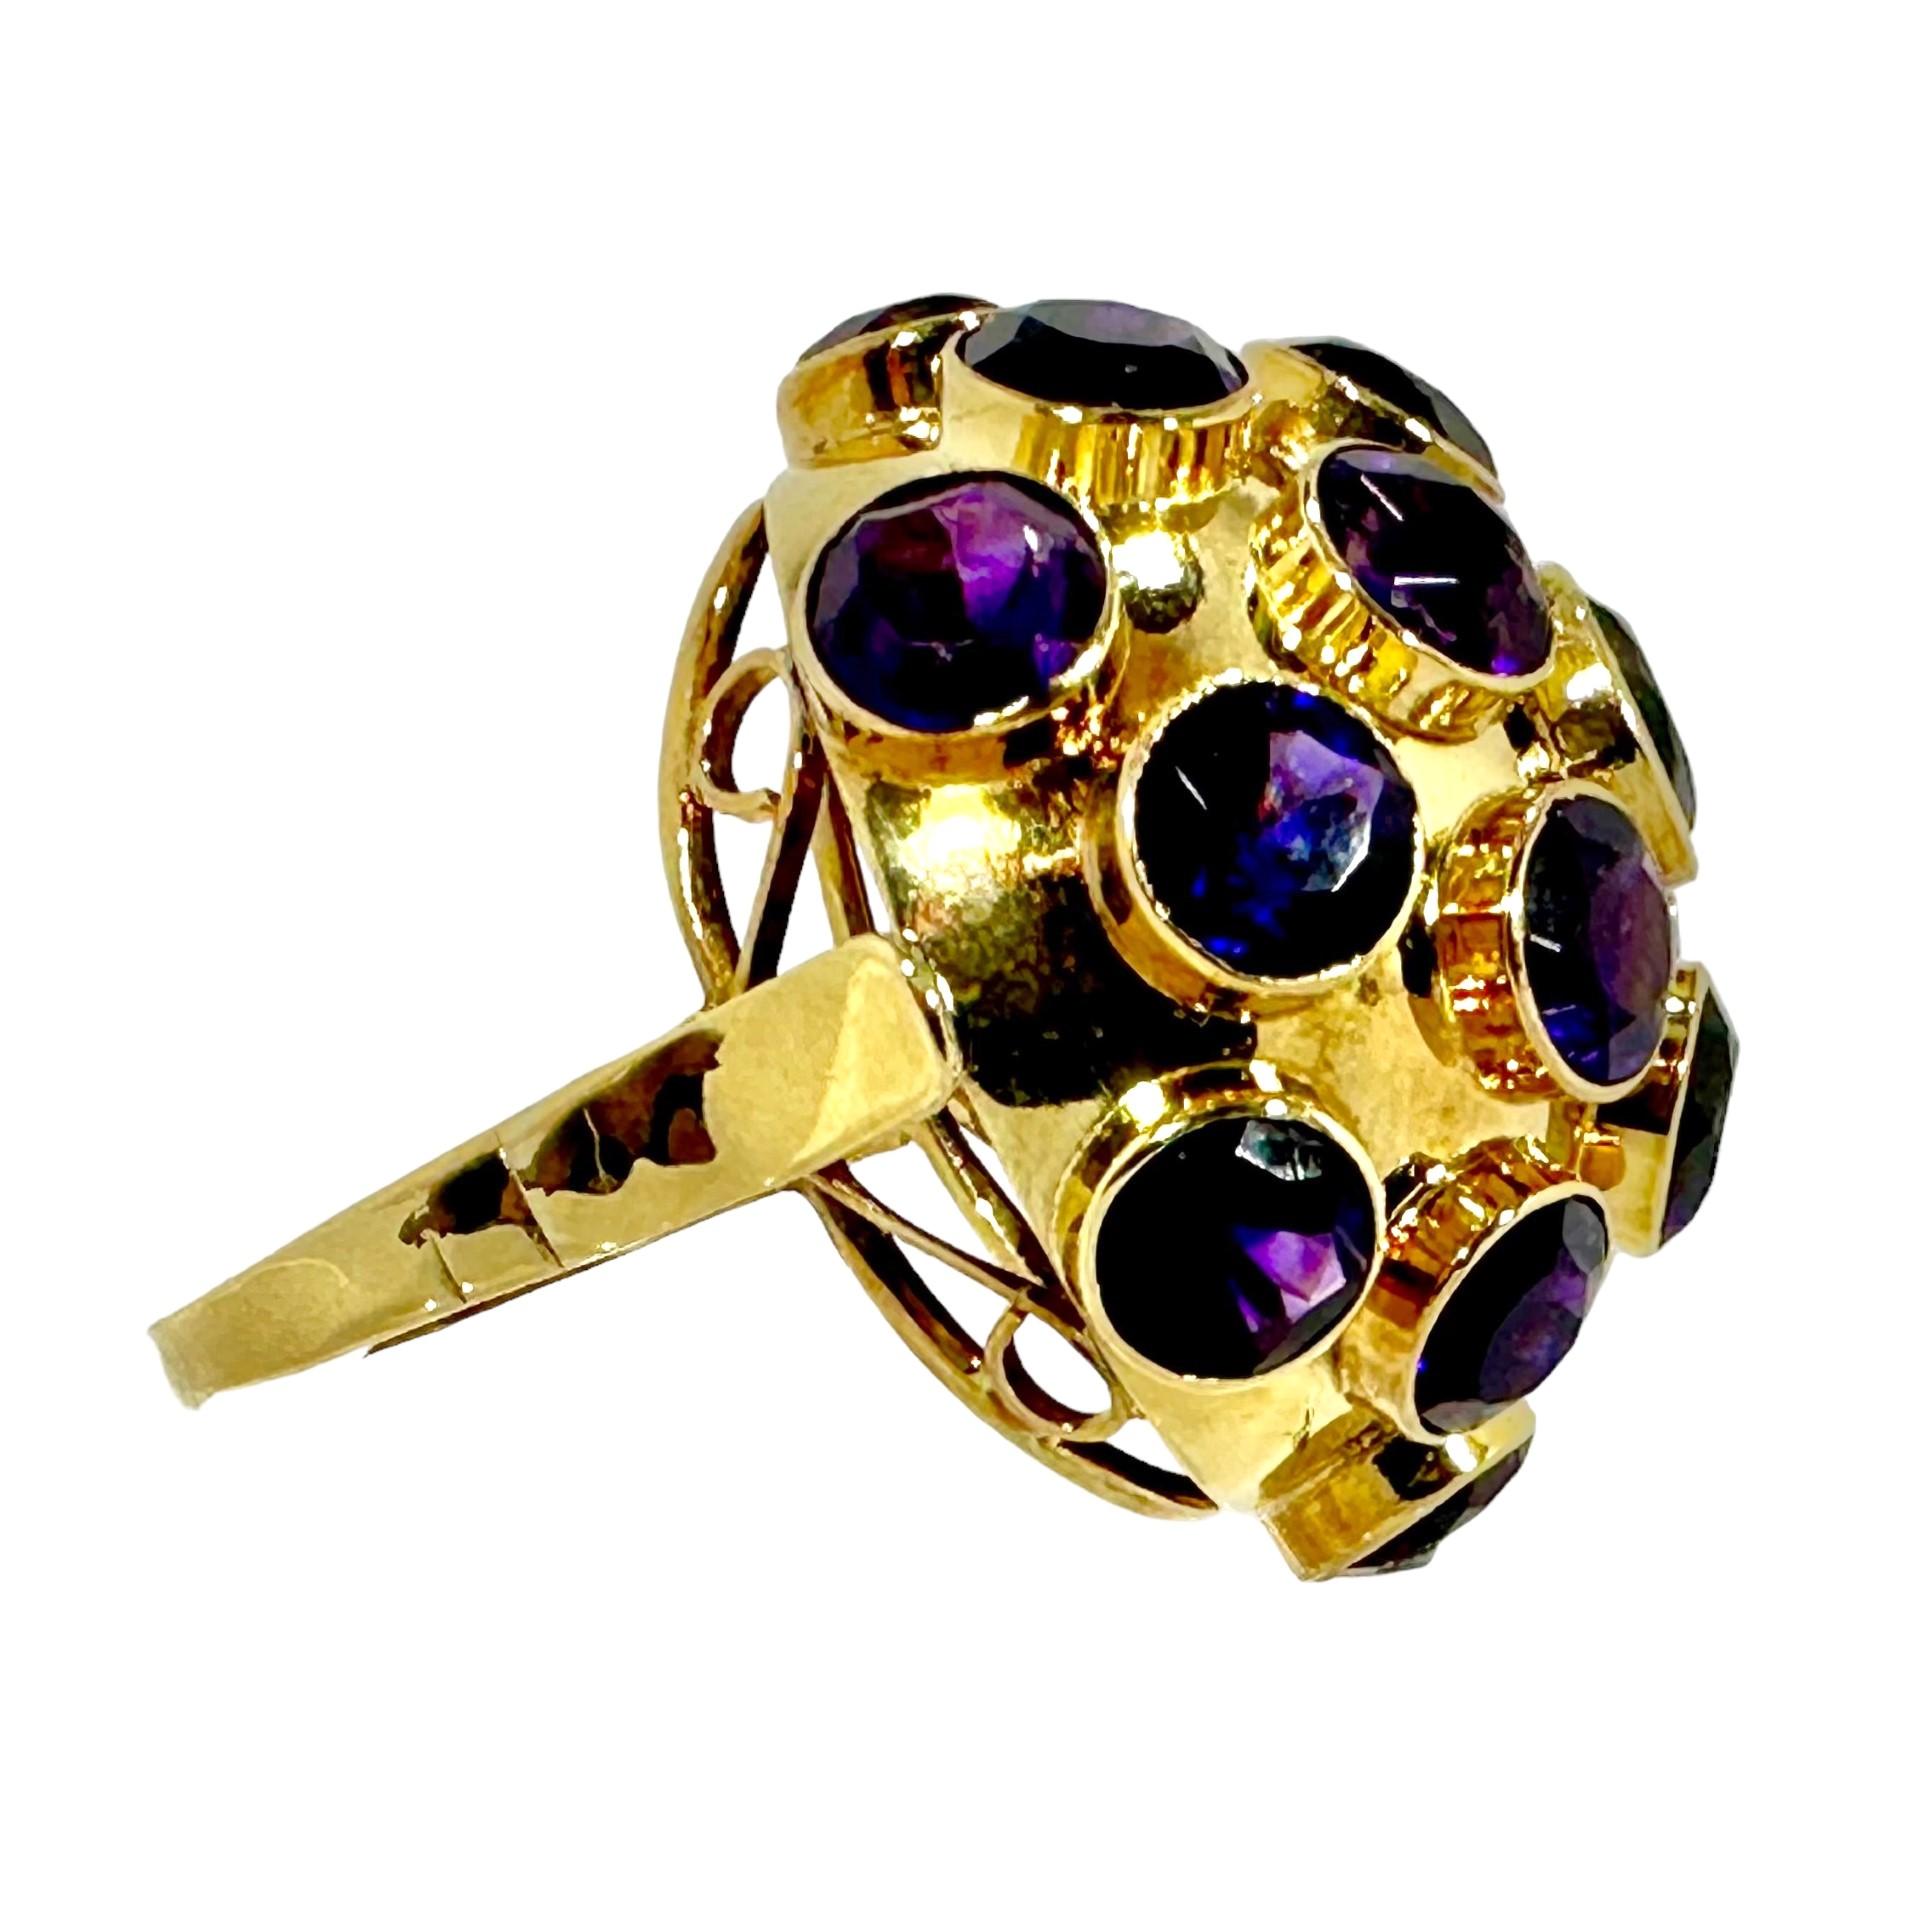 Modern Mid-20th Century 18k Yellow Gold and All Amethyst Large Sputnik Dome Ring   For Sale